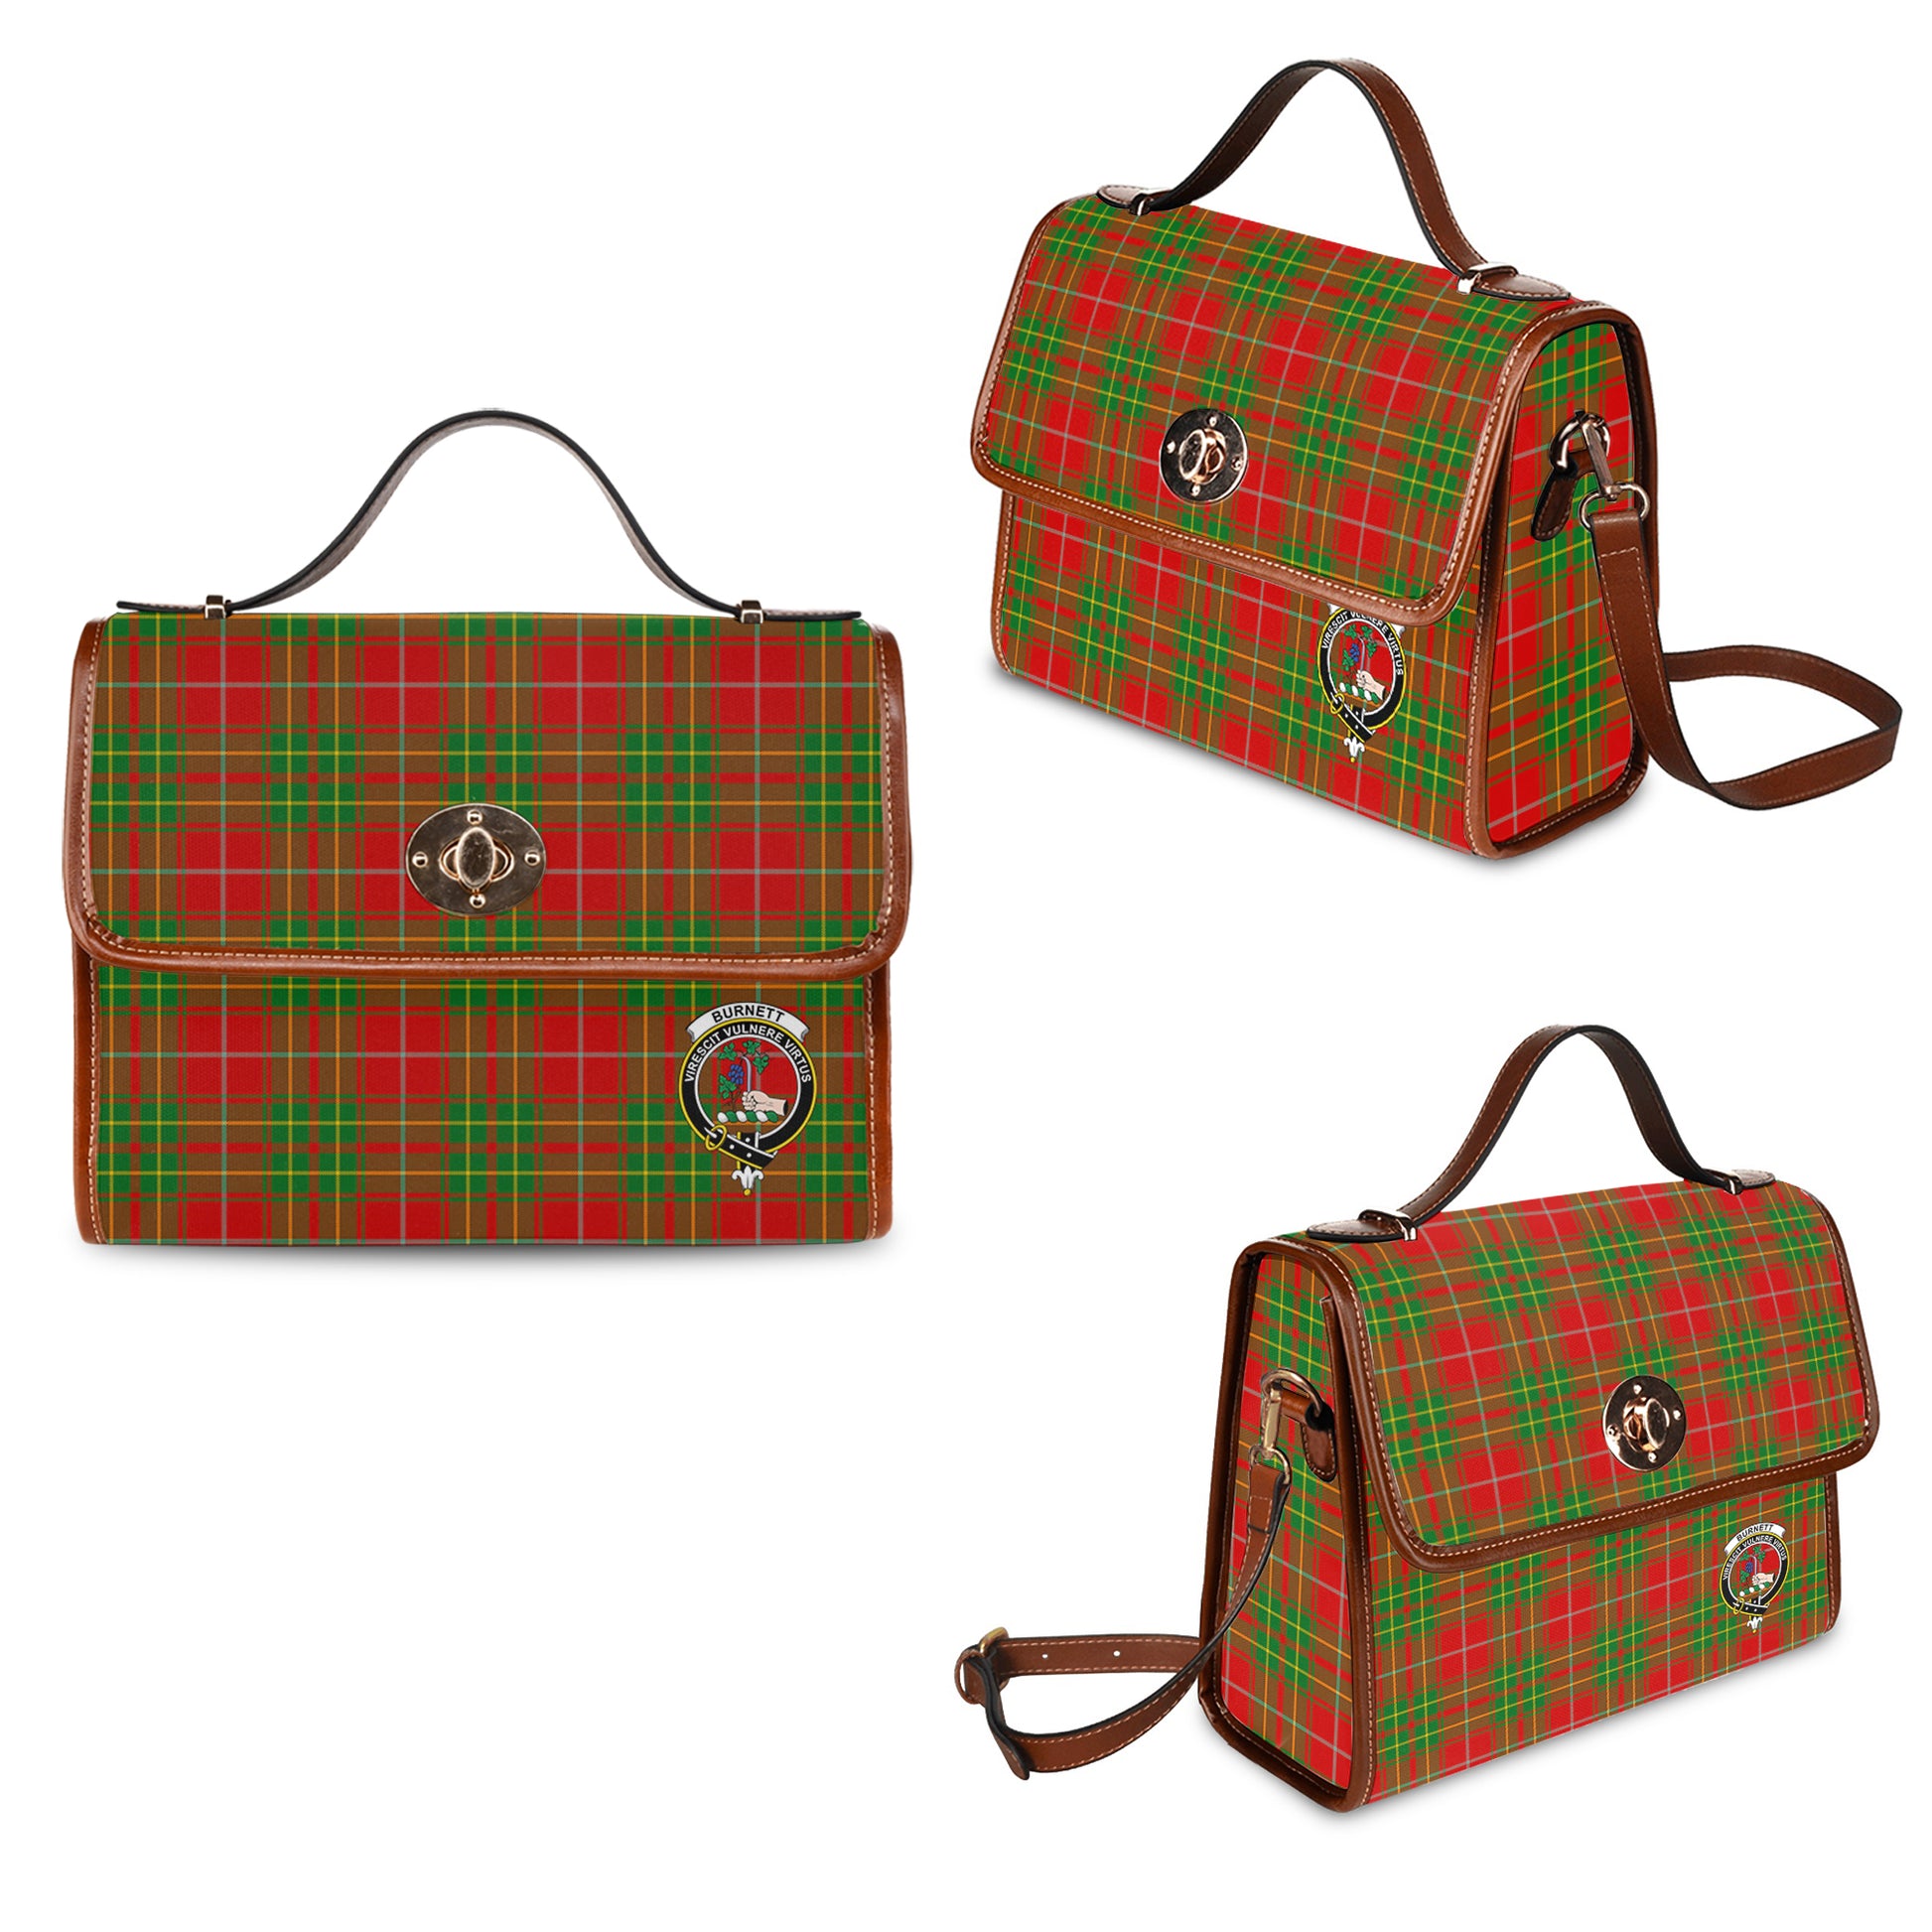 Burnett Ancient Tartan Leather Strap Waterproof Canvas Bag with Family Crest One Size 34cm * 42cm (13.4" x 16.5")